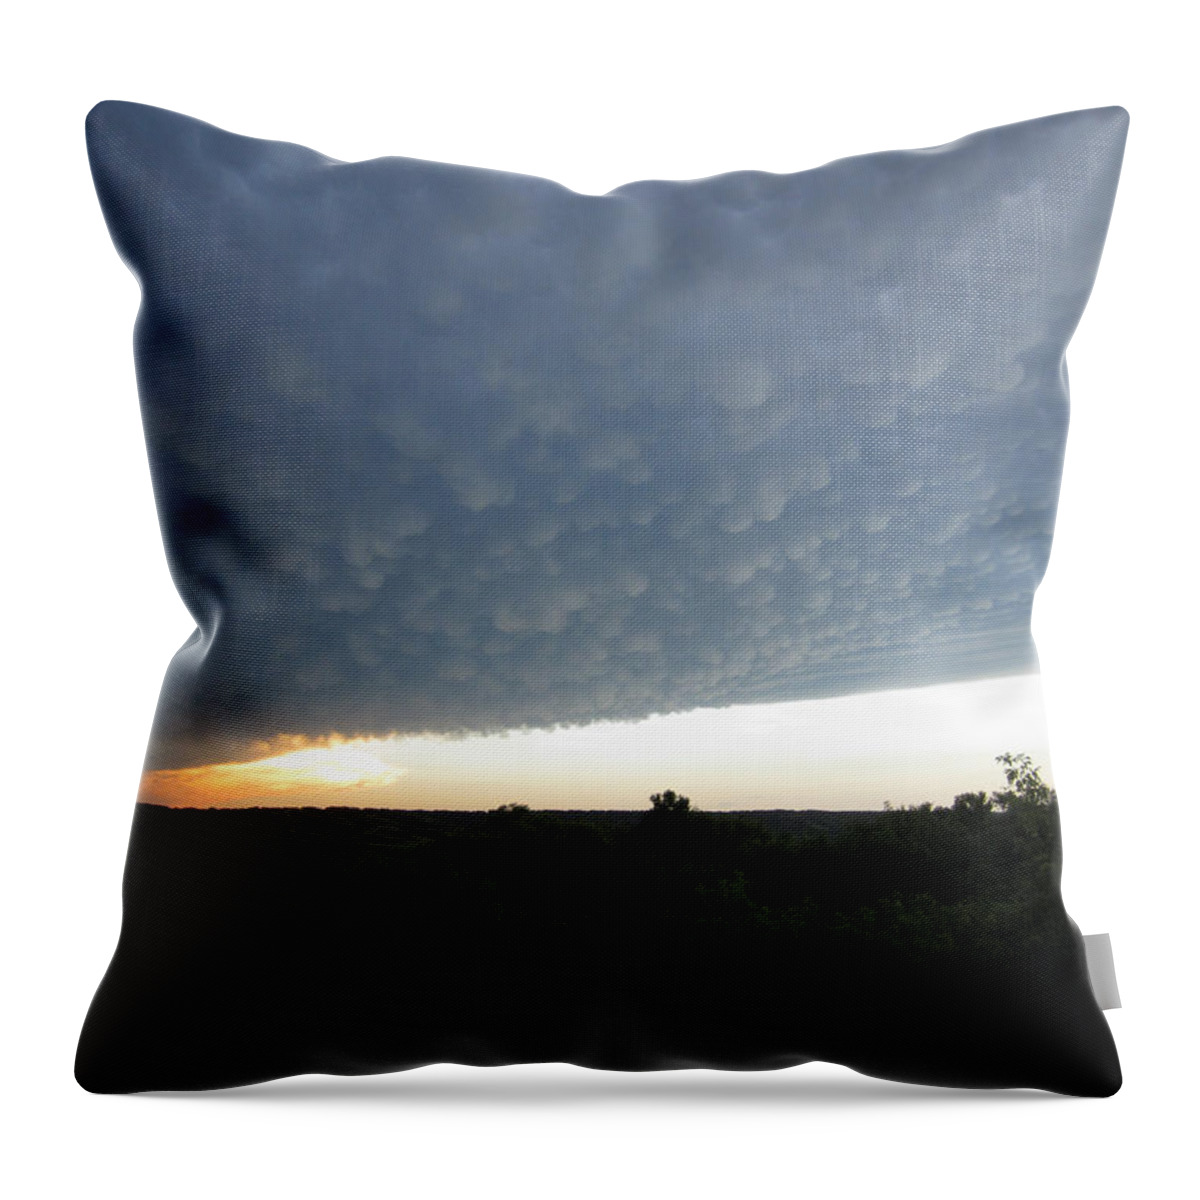 Tornado Throw Pillow featuring the photograph After the Tornado by Andrea Lawrence